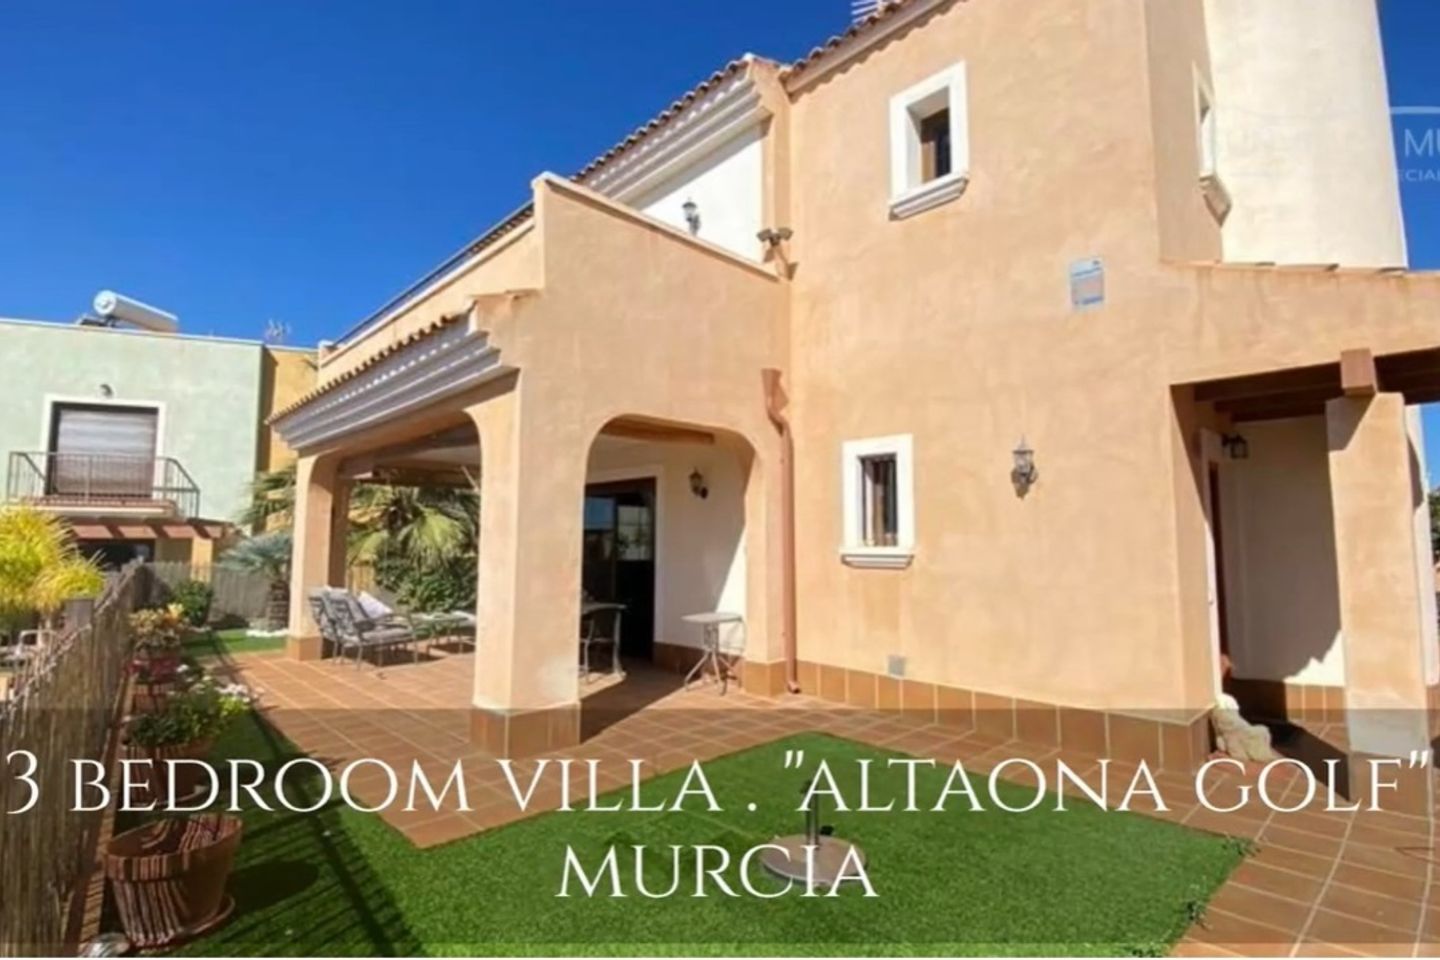 Altaona Golf and Country Village, Murcia Town, Murcia, Spain